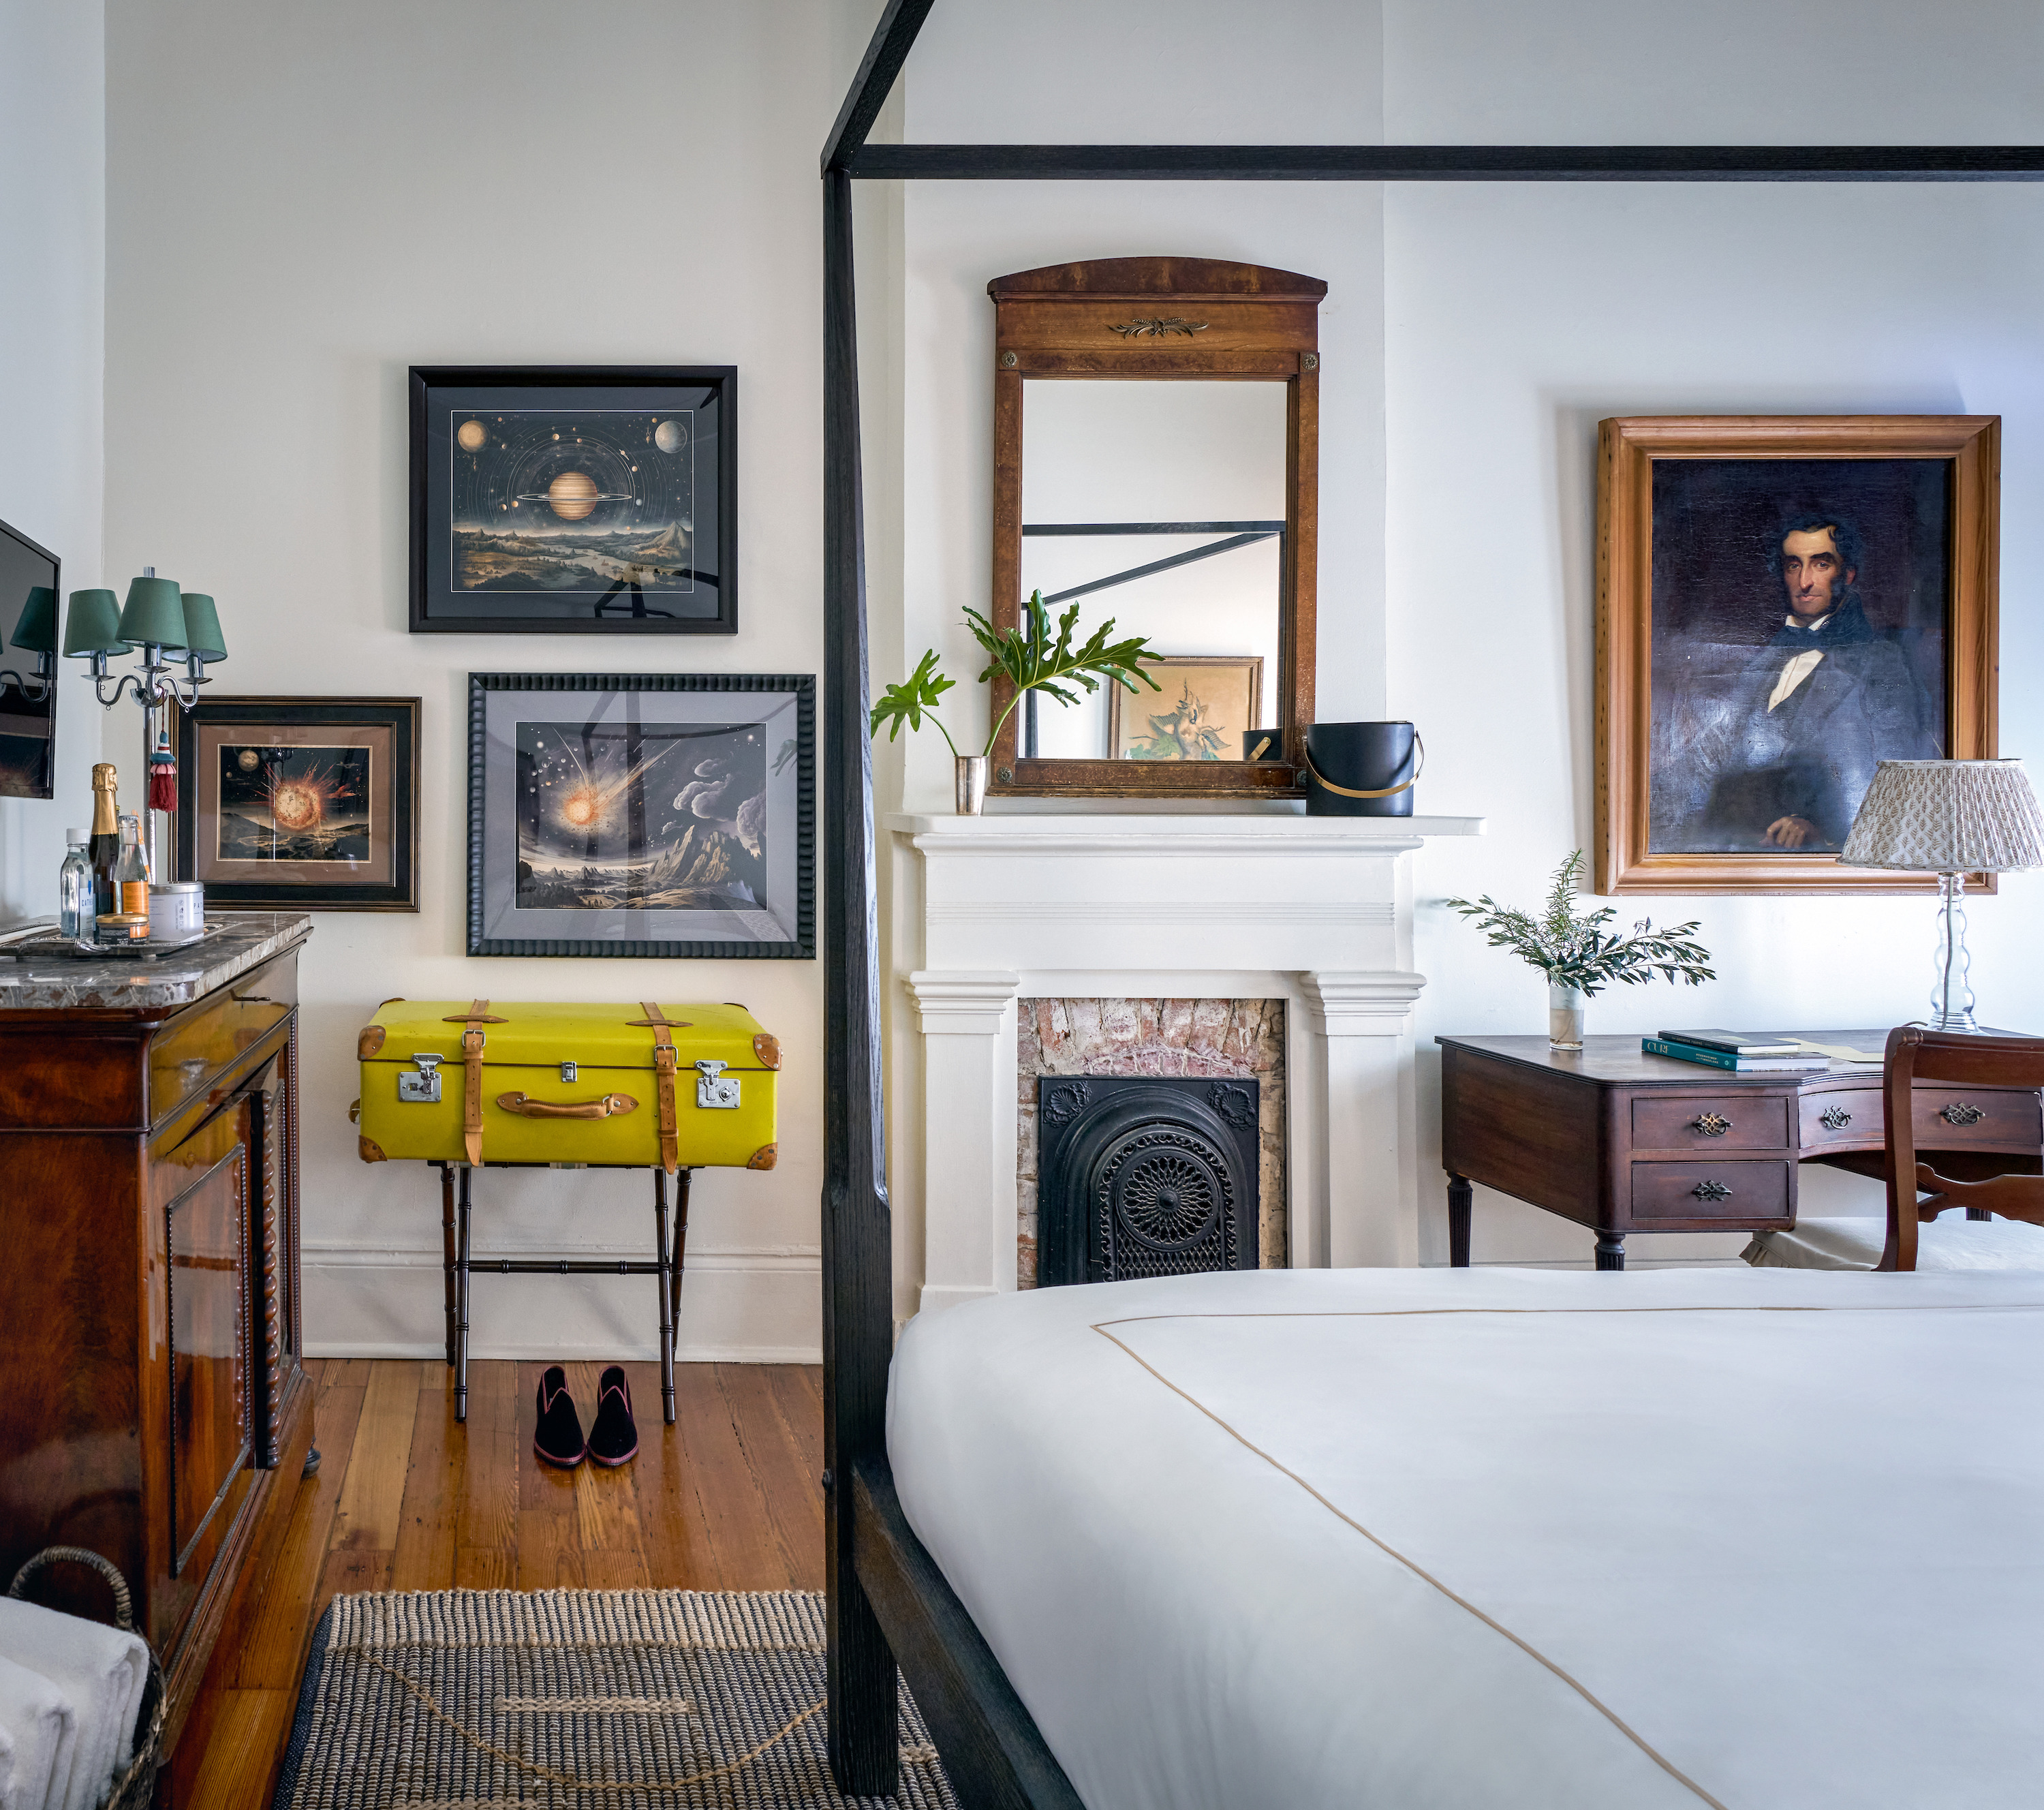 Inside a hotel room with antique art, an ornate old fireplace, and a yellow suitcase